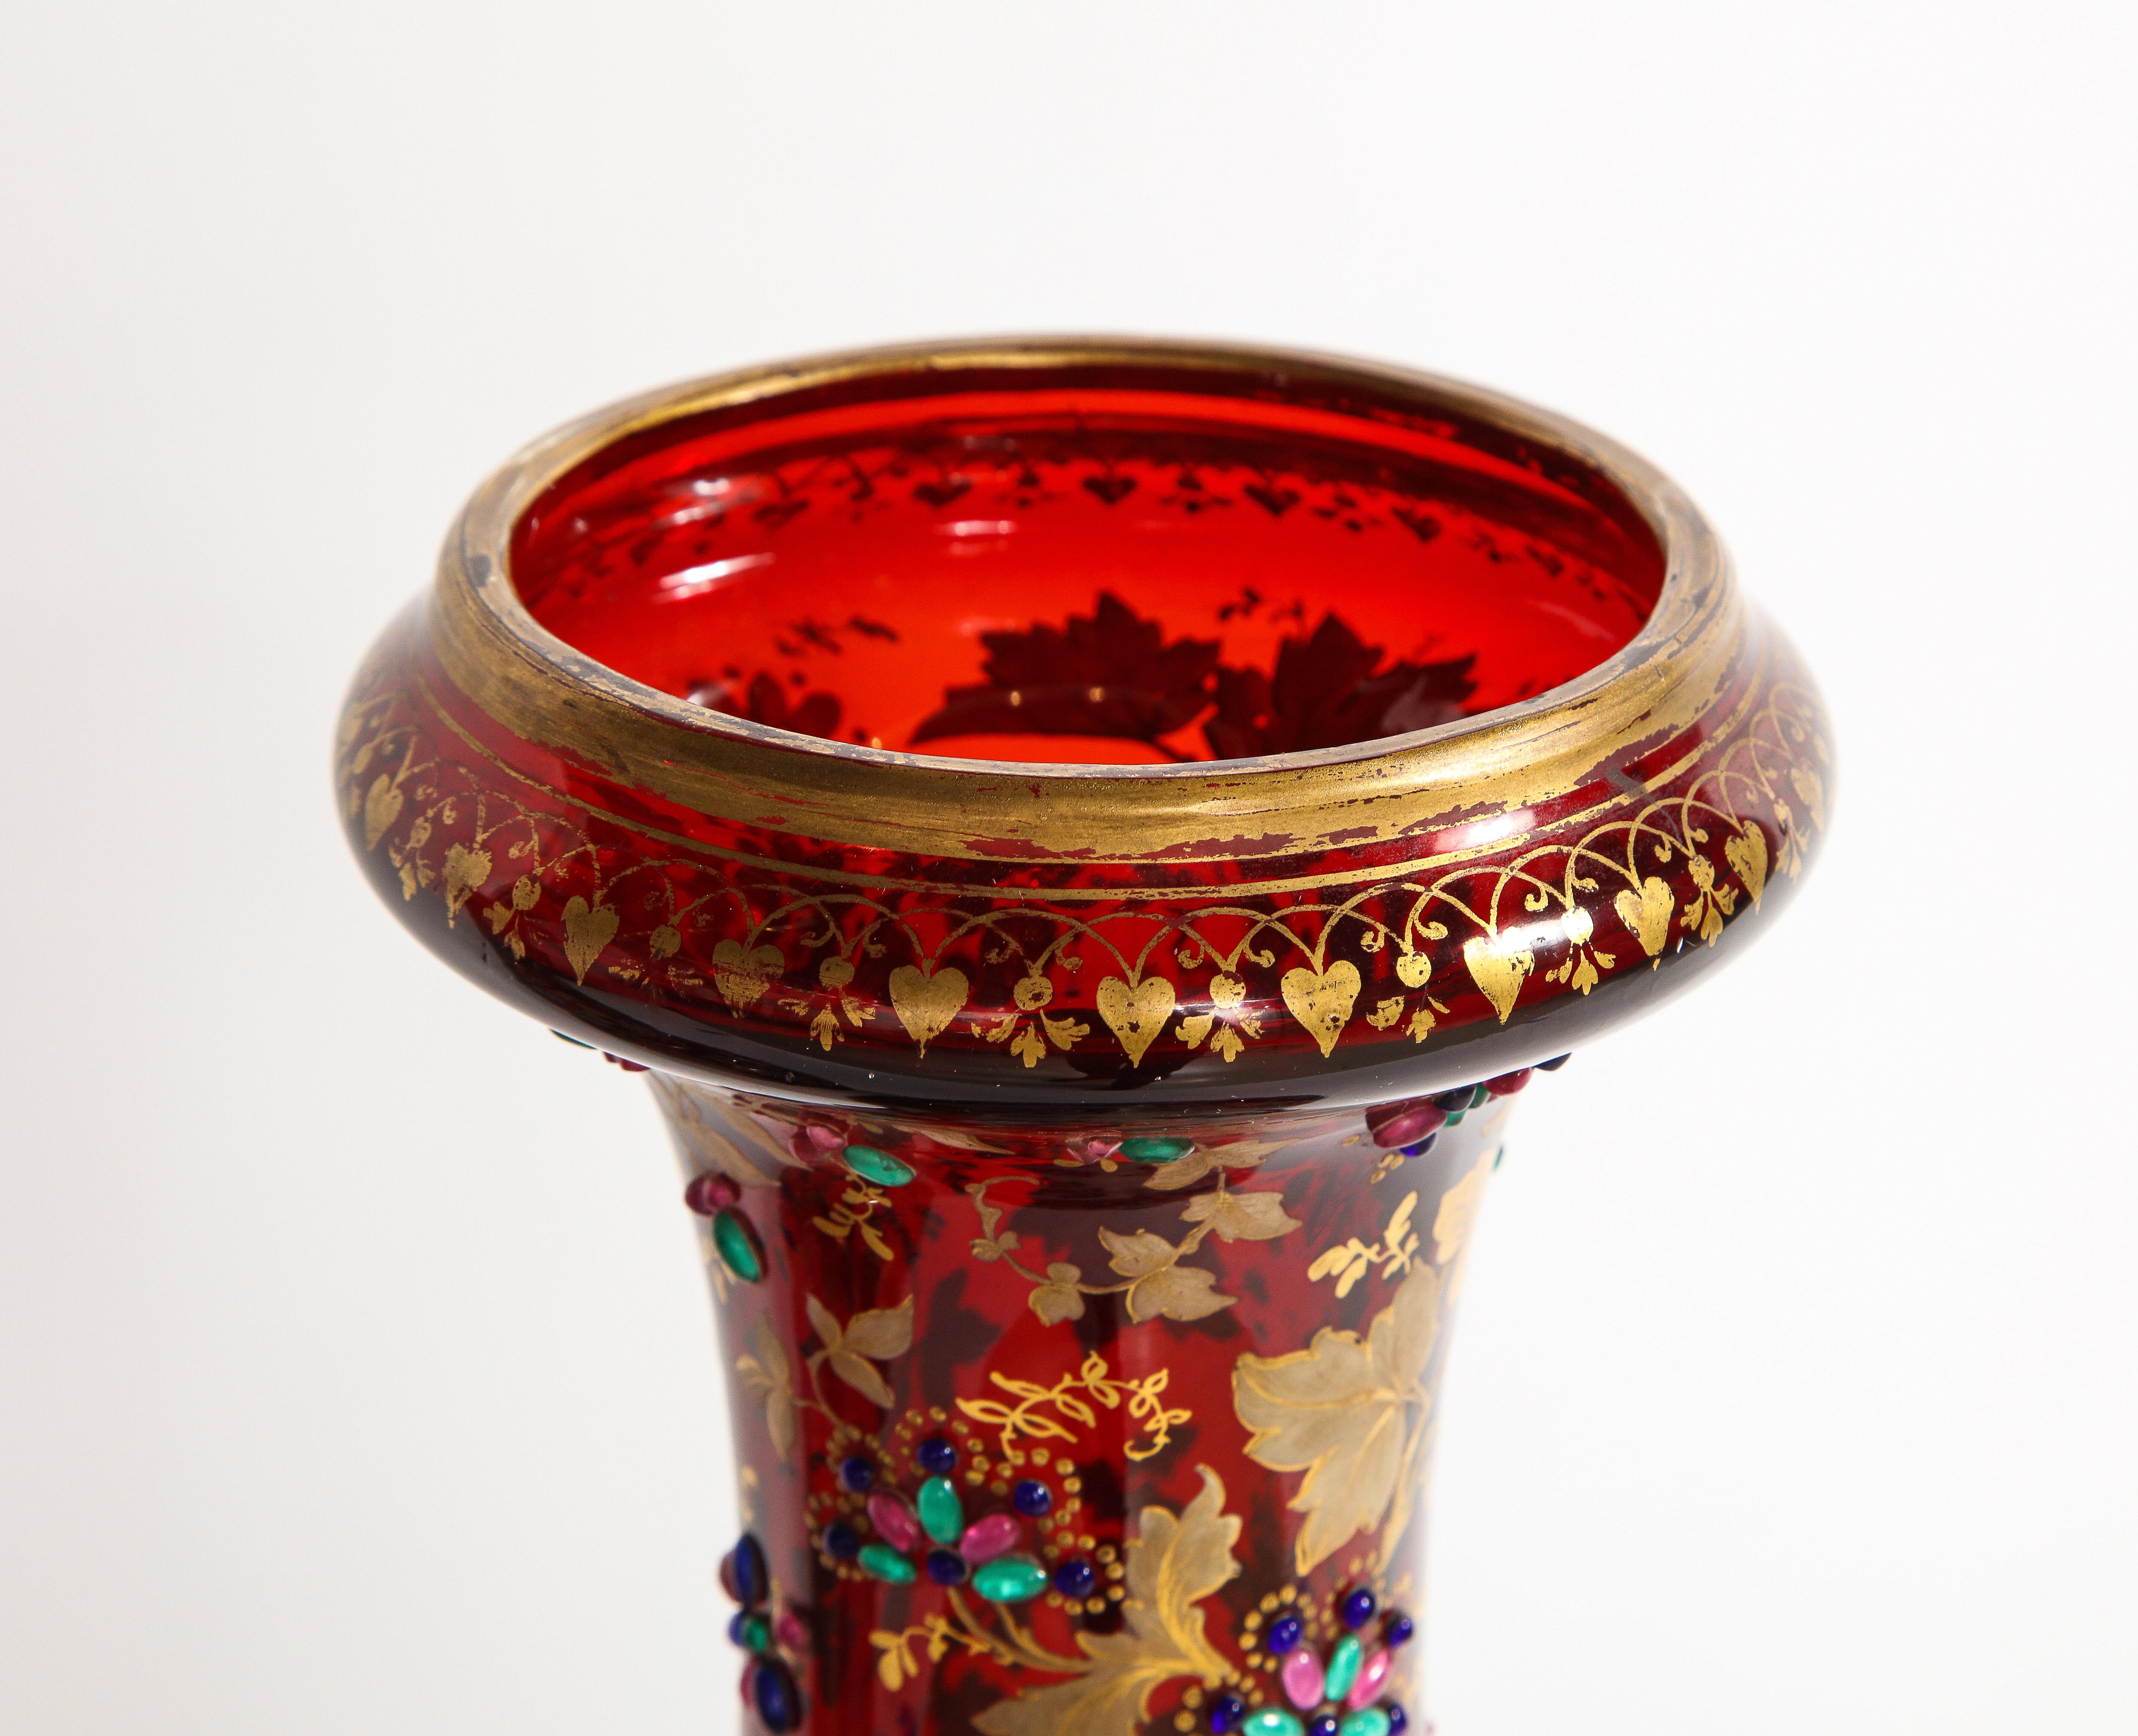 Monumental Pr Moser jeweled Ruby-Red Overlay Two-Piece 24k Gold, Enameled Vases For Sale 2